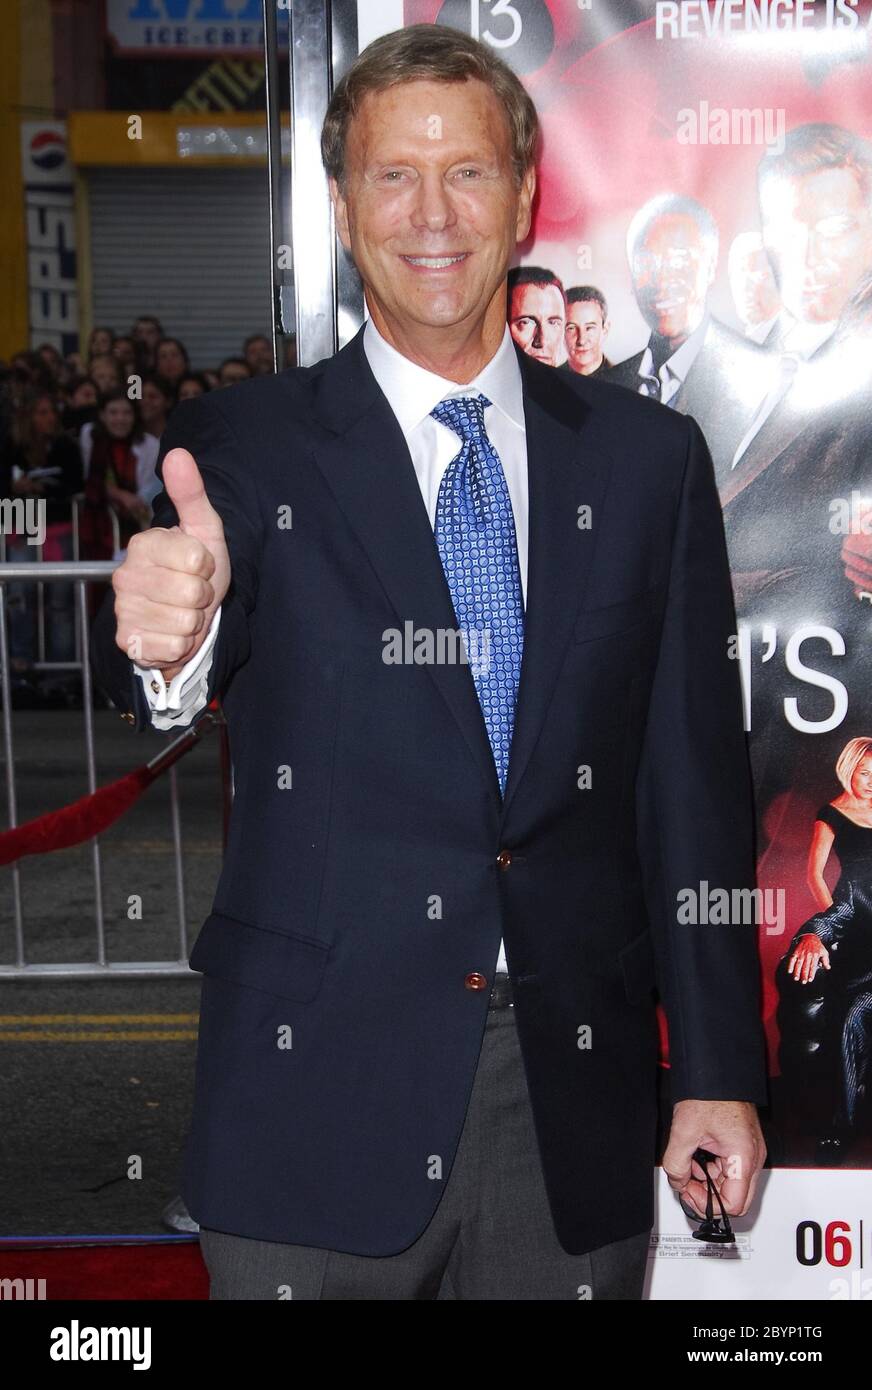 Super Dave Osborne at the Los Angeles Premiere of 'Ocean's Thirteen' held at the Mann Grauman's Chinese Theater in Hollywood, CA. The event took place on Tuesday, June 5, 2007. Photo by: SBM / PictureLux - File Reference # 34006-6379SBMPLX Stock Photo